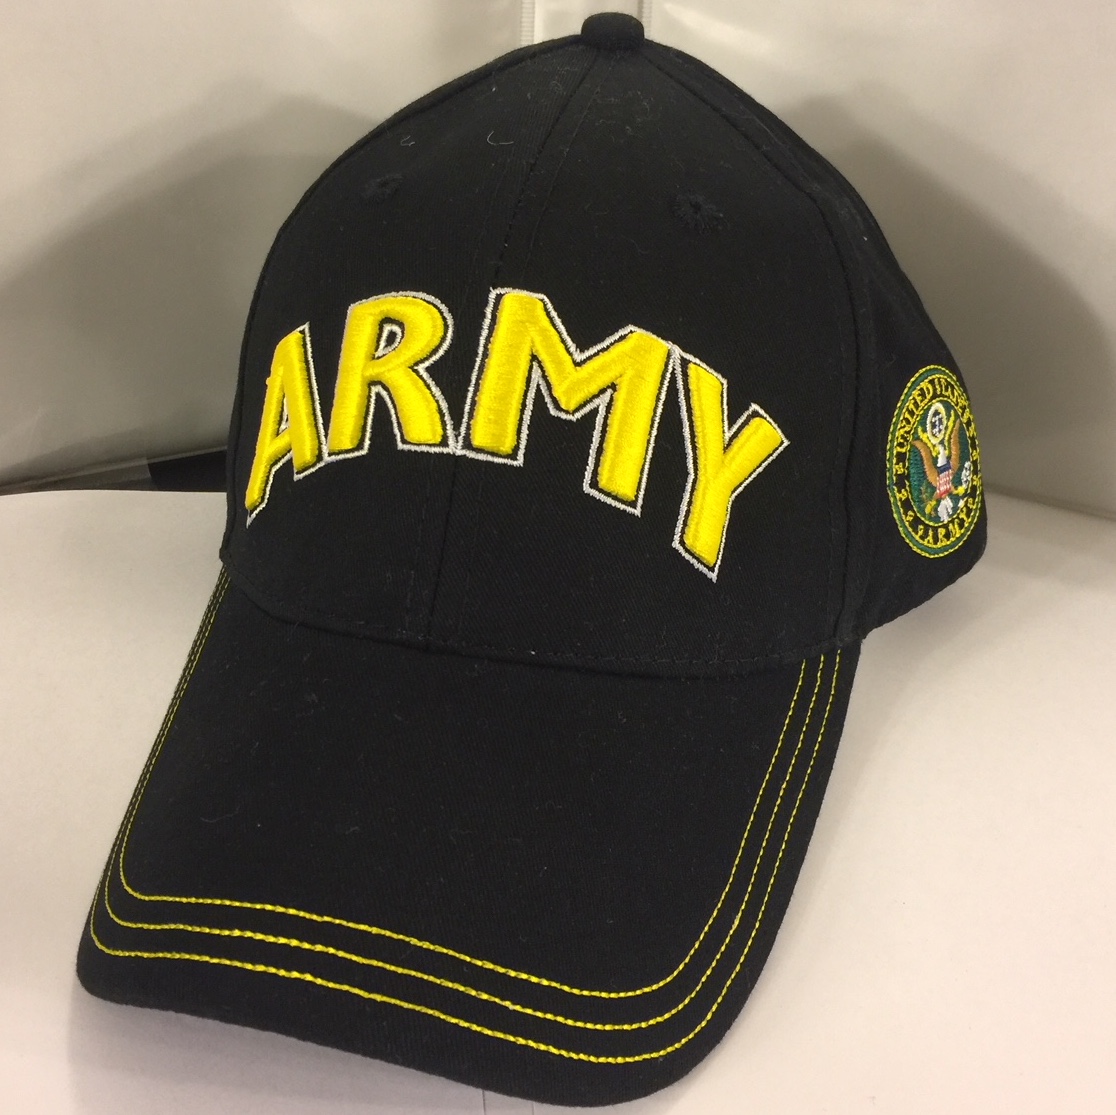 ARMY (Black/3-D Yellow Letters)